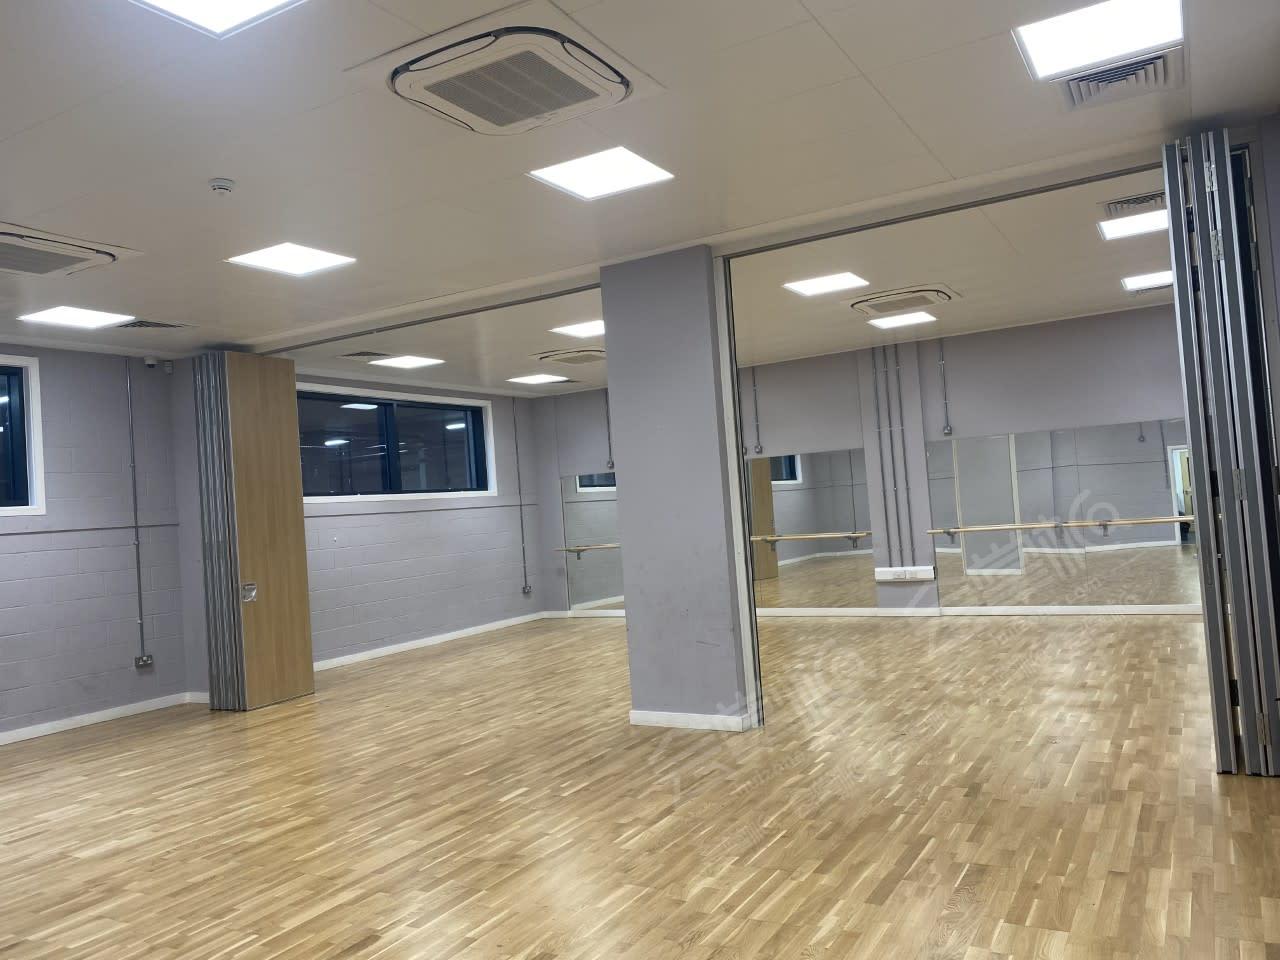 Event and Performance Space with Room Splitter and Mirrored Wall in Acton